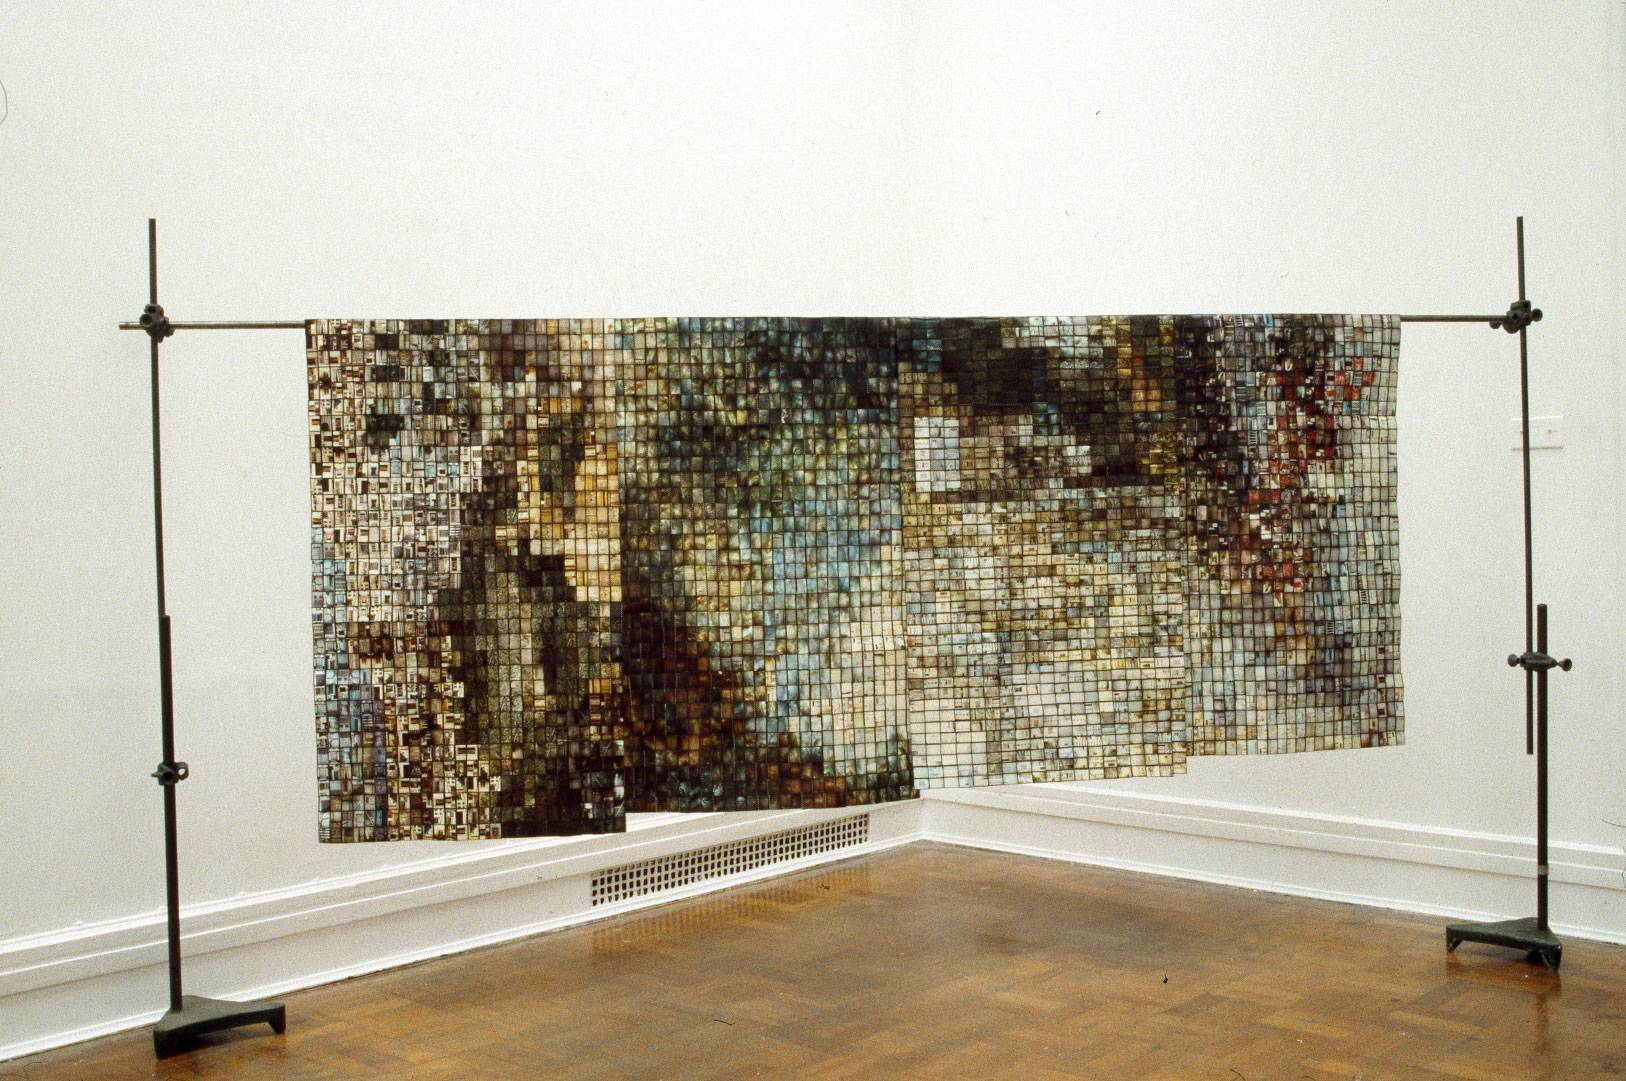 installation view of an art work made of hundreds of individual photographs threaded together